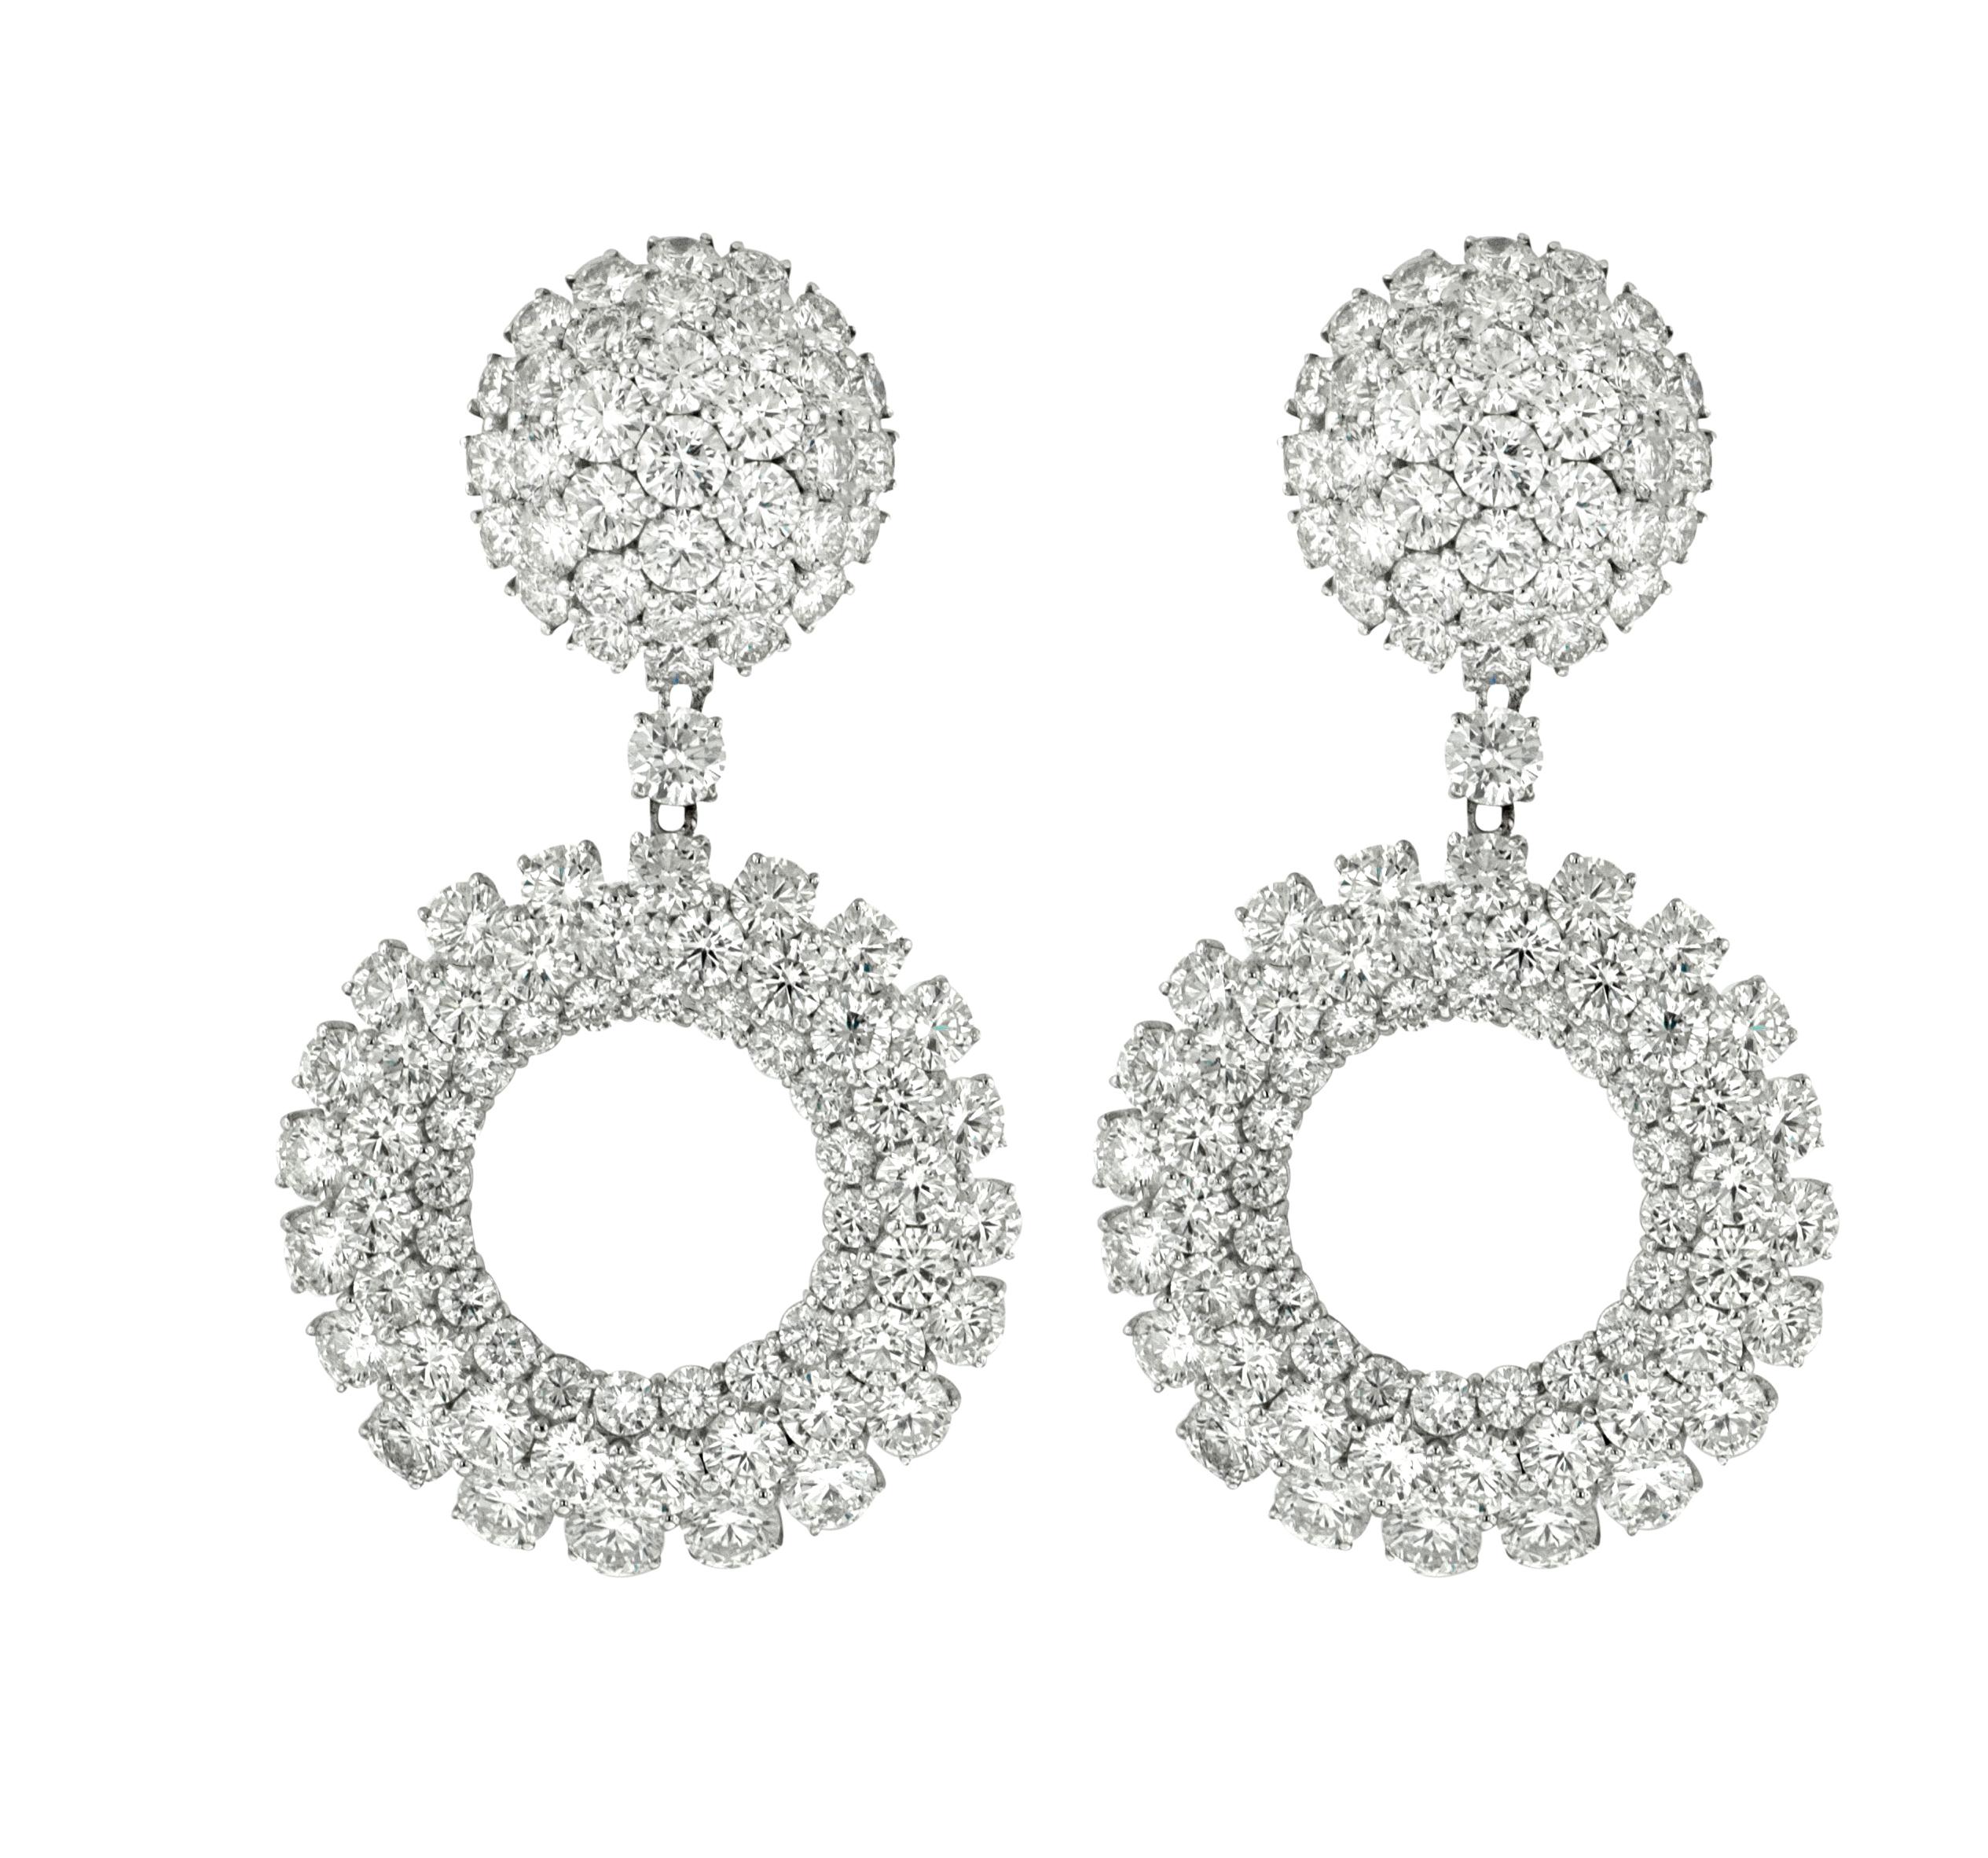 Circle pave fashion diamond earrings with round brilliant cut diamonds (37.00ct) set in 18kt white gold (comes in a set)
